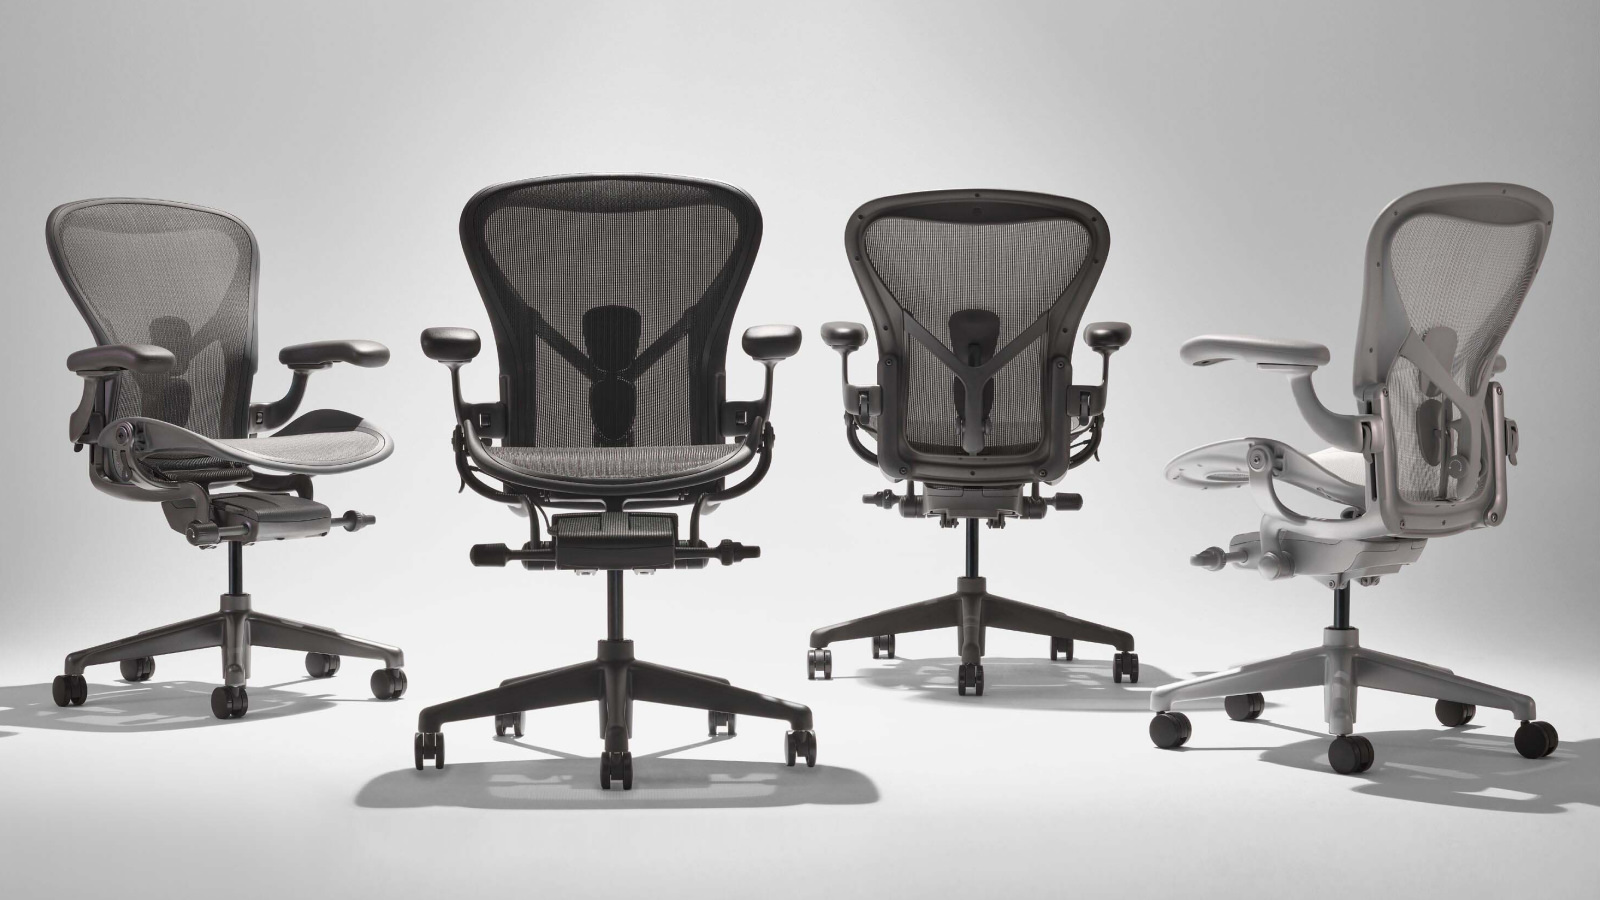 Four Aeron Chairs in four different colours.